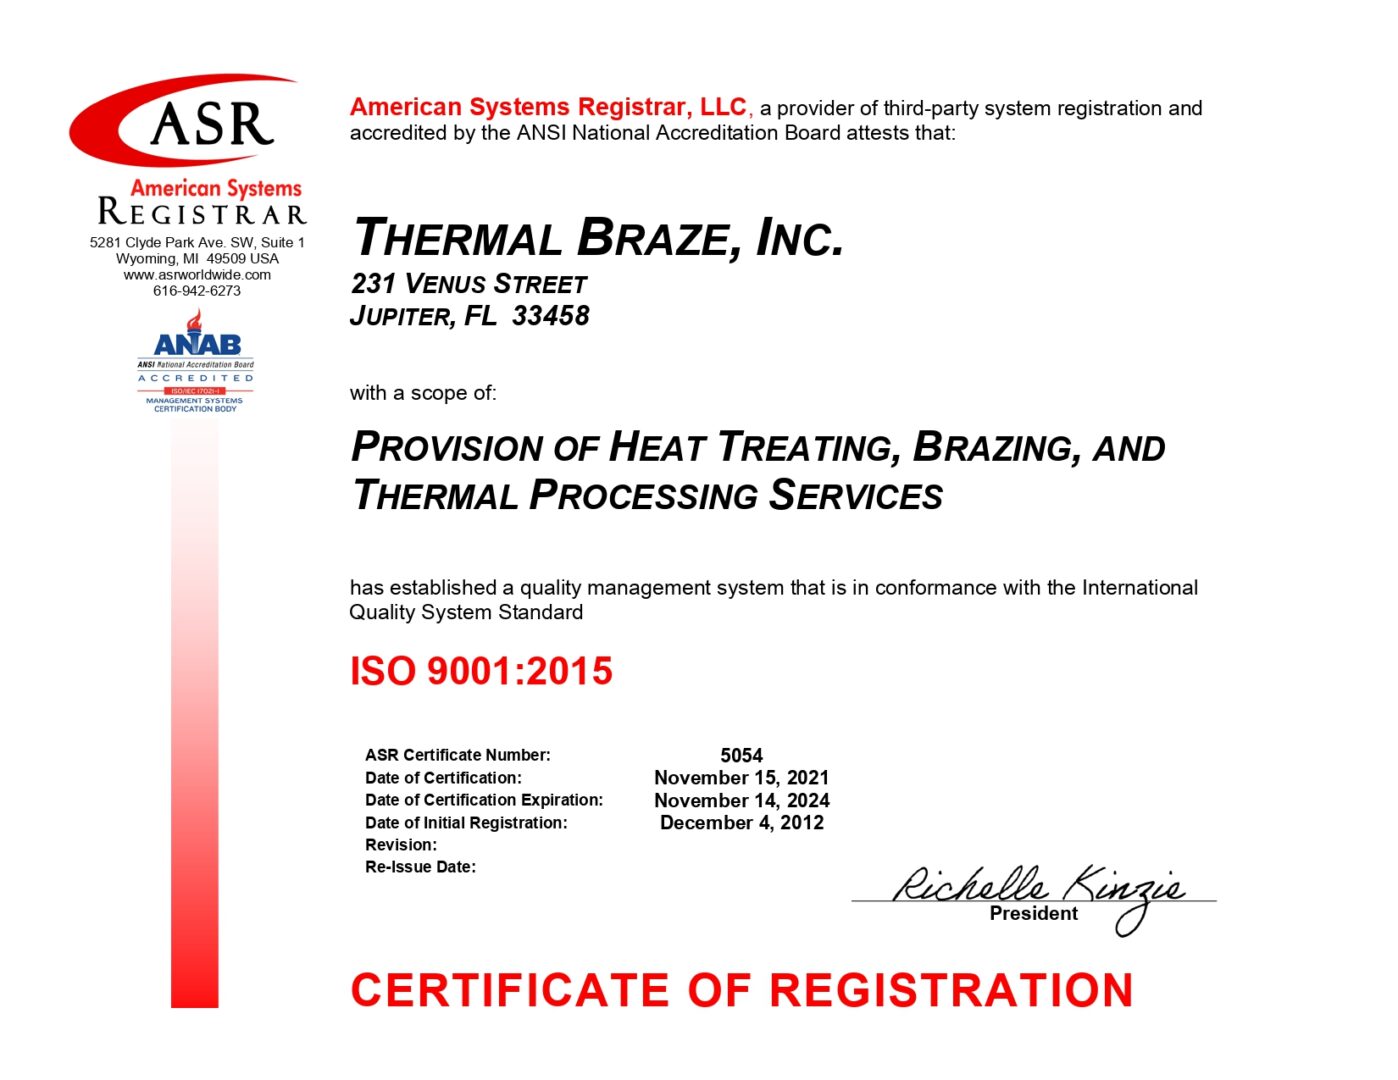 Thermal Braze ISO 9001 Certificate Nov 2021signed_page-0001